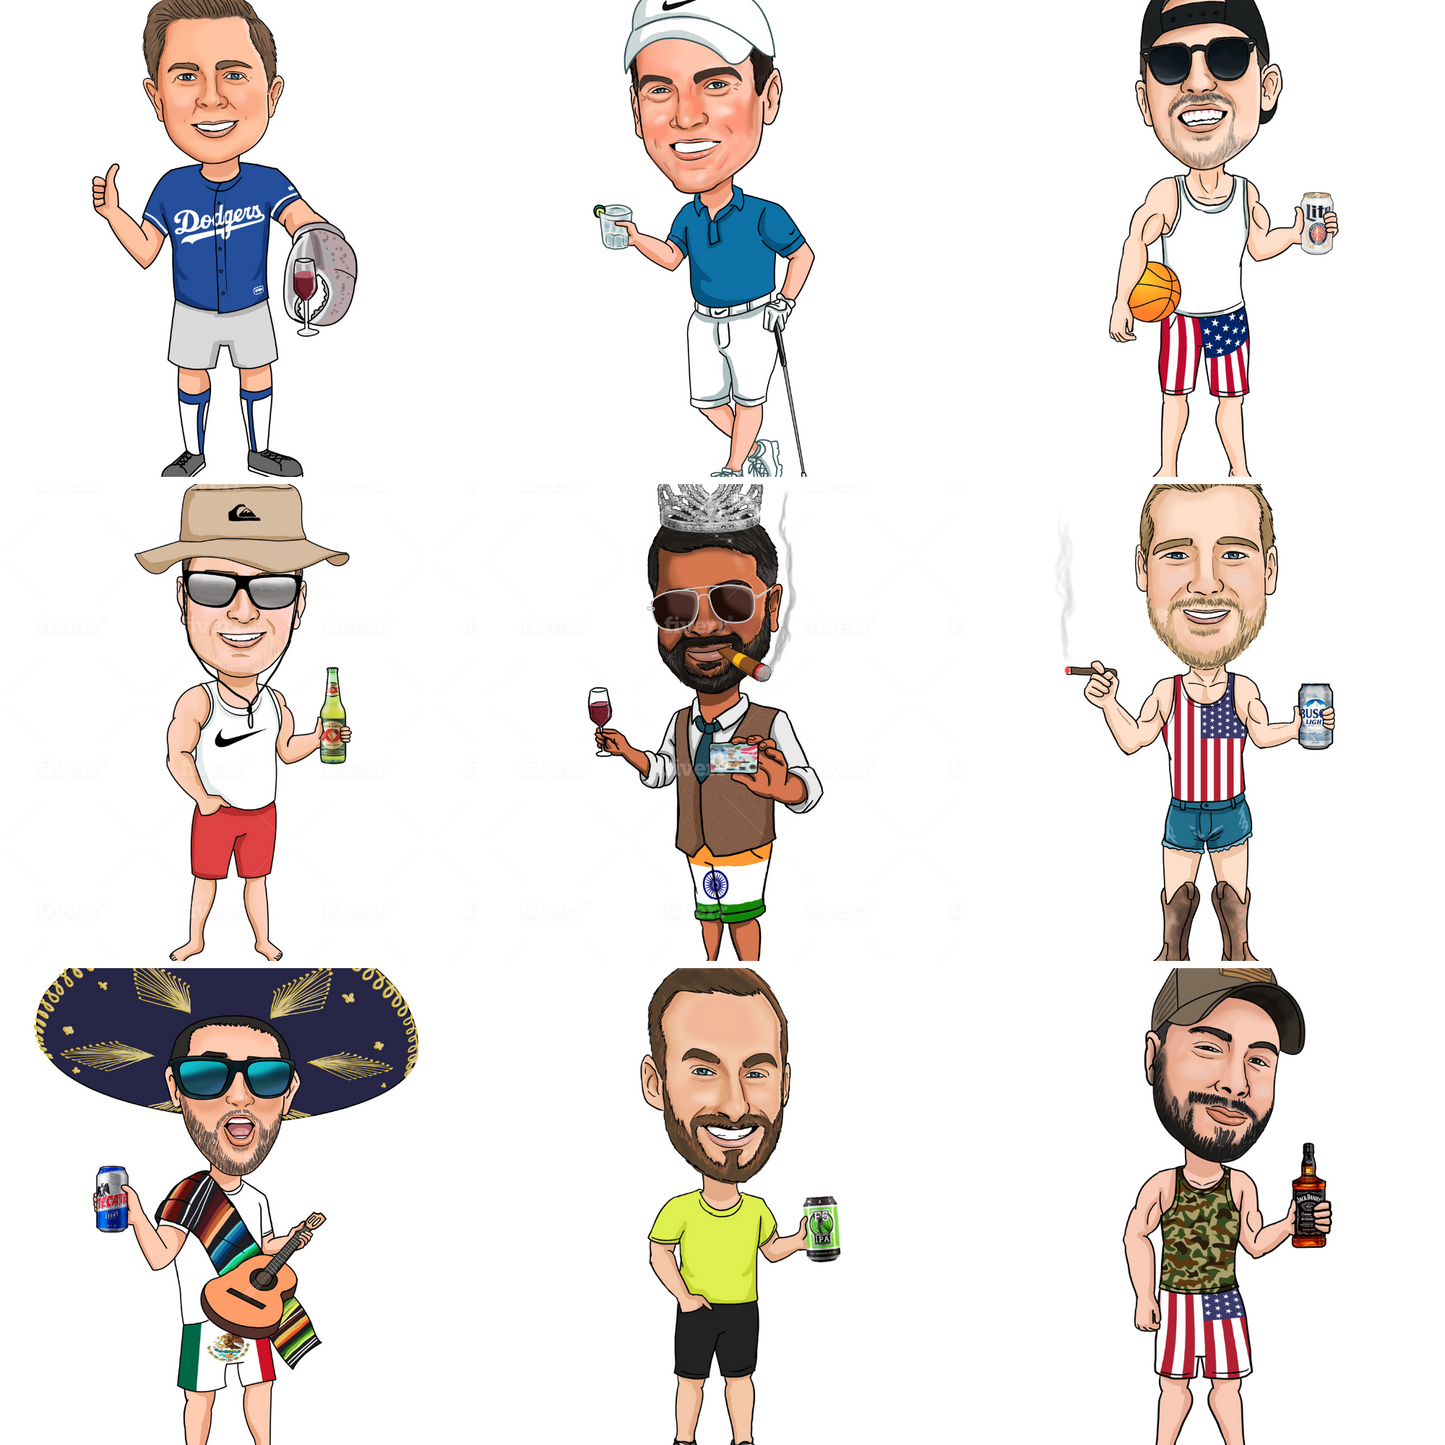 Caricature Can Coolers - Bachelor Party